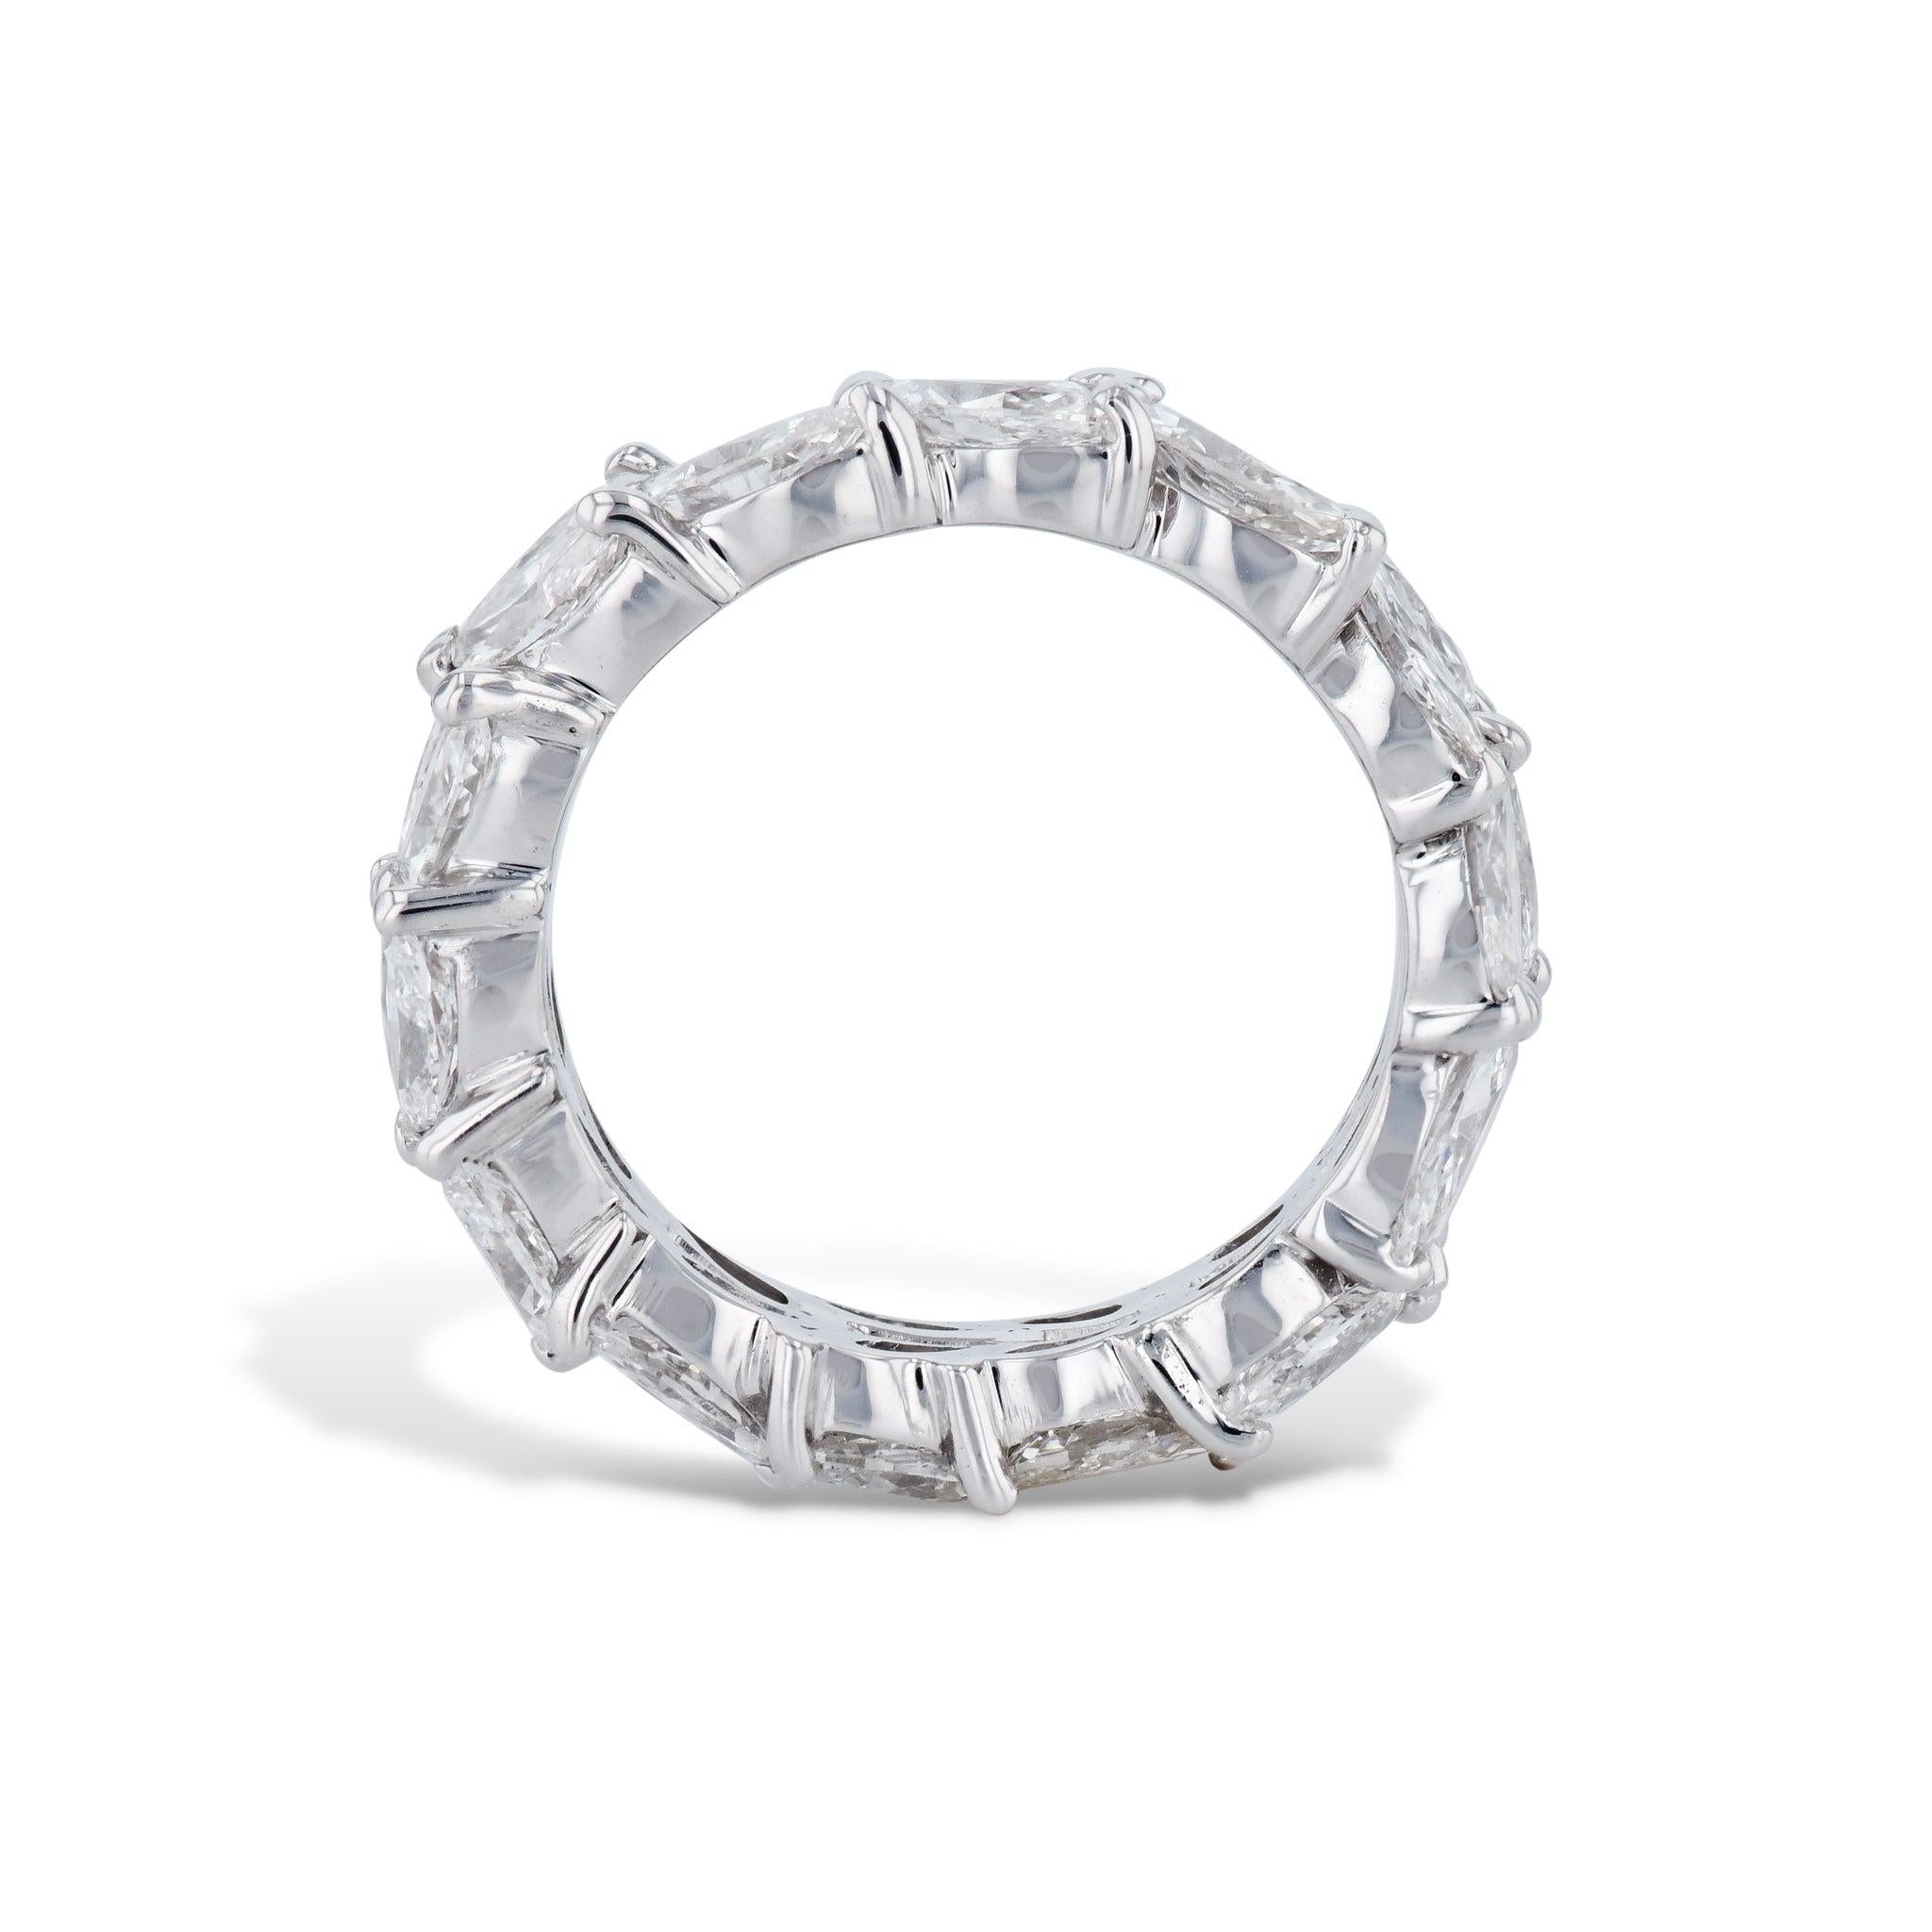 Experience lavish luxury with this exquisite Marquise Diamond White Gold Eternity Band Estate Ring! Crafted in 18kt. White Gold, this mesmerizing masterpiece features 28 sparkling diamonds estimated to total 6.00ct TW. With each diamond prong set.